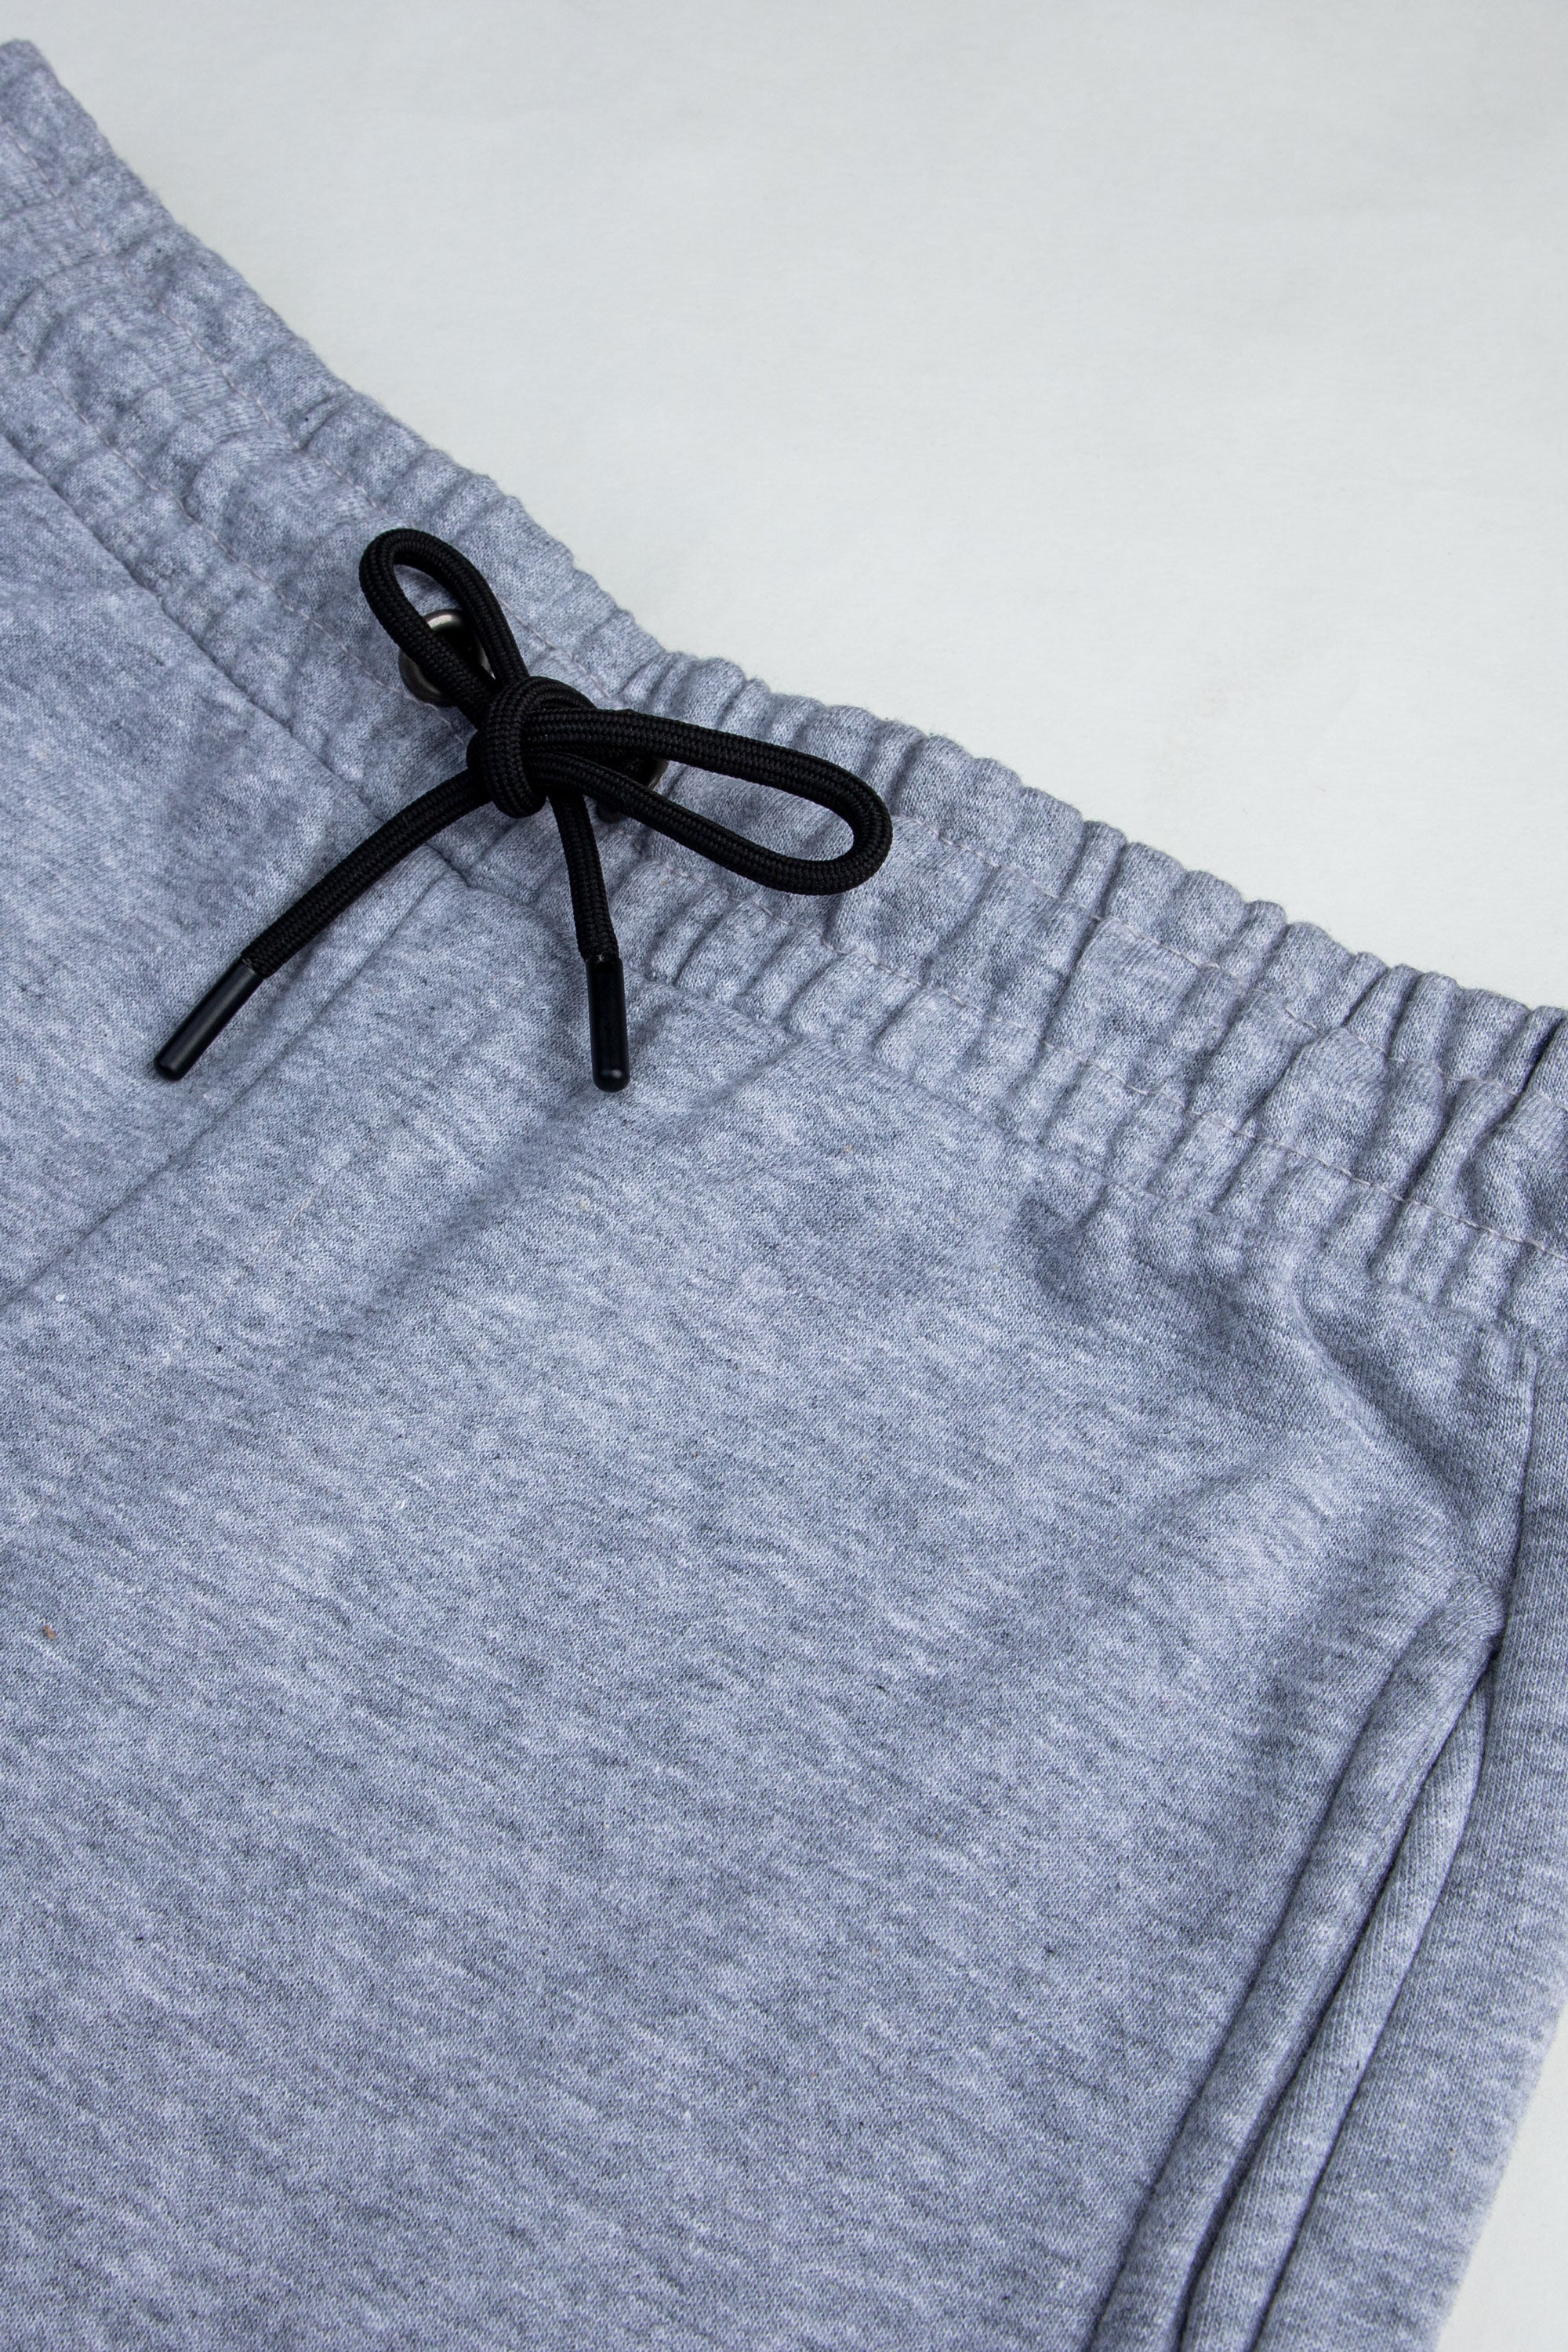 Comfortable Grey Tracksuit